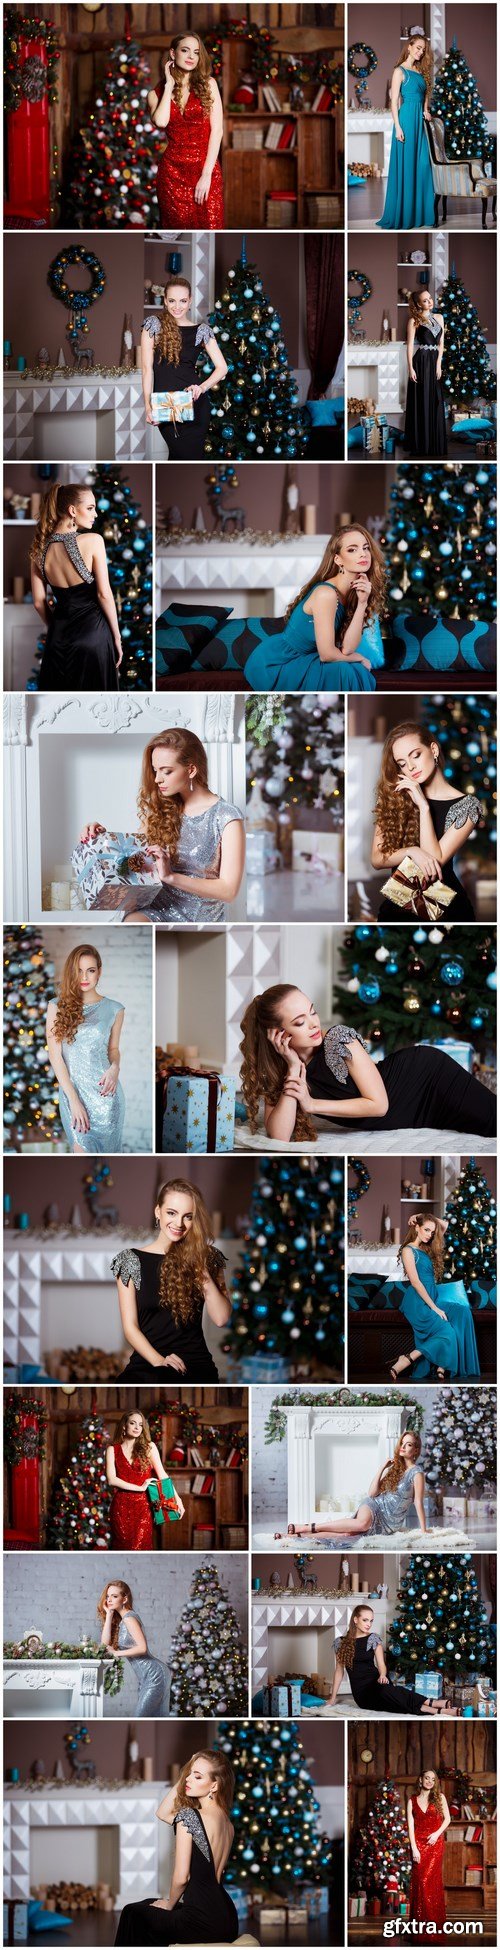 Young woman in elegant dress over christmas interior background - 18xUHQ JPEG